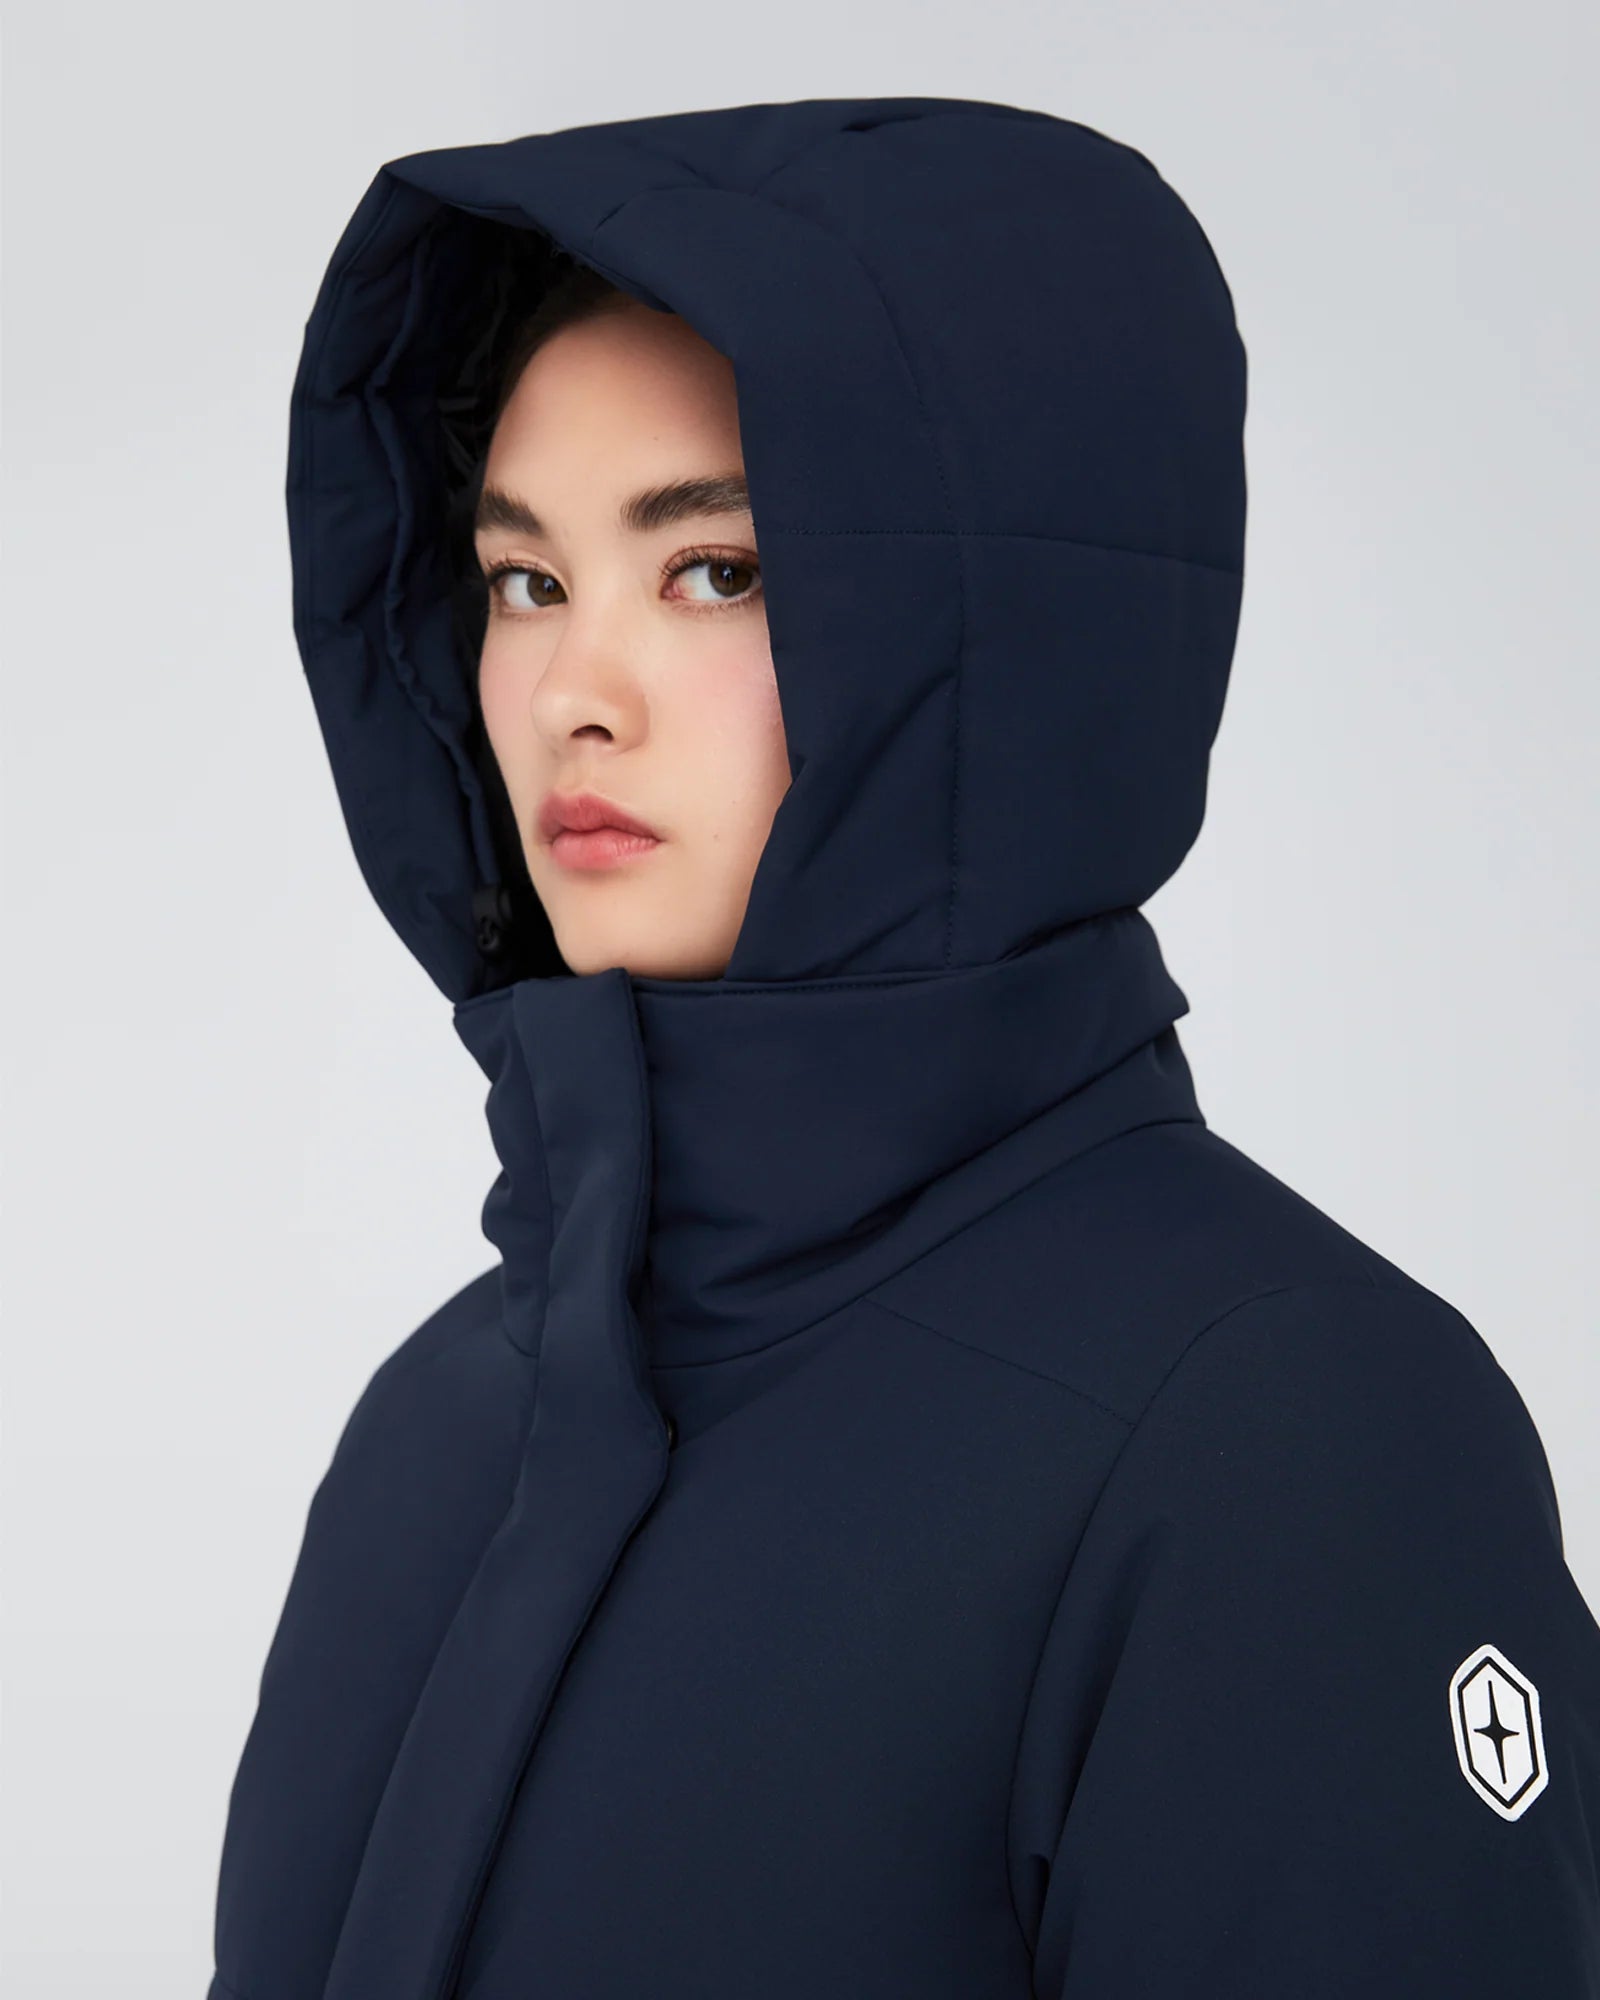 QUARTZ Co MADELINE - Hooded Insulated Winter Jacket - Boutique Bubbles